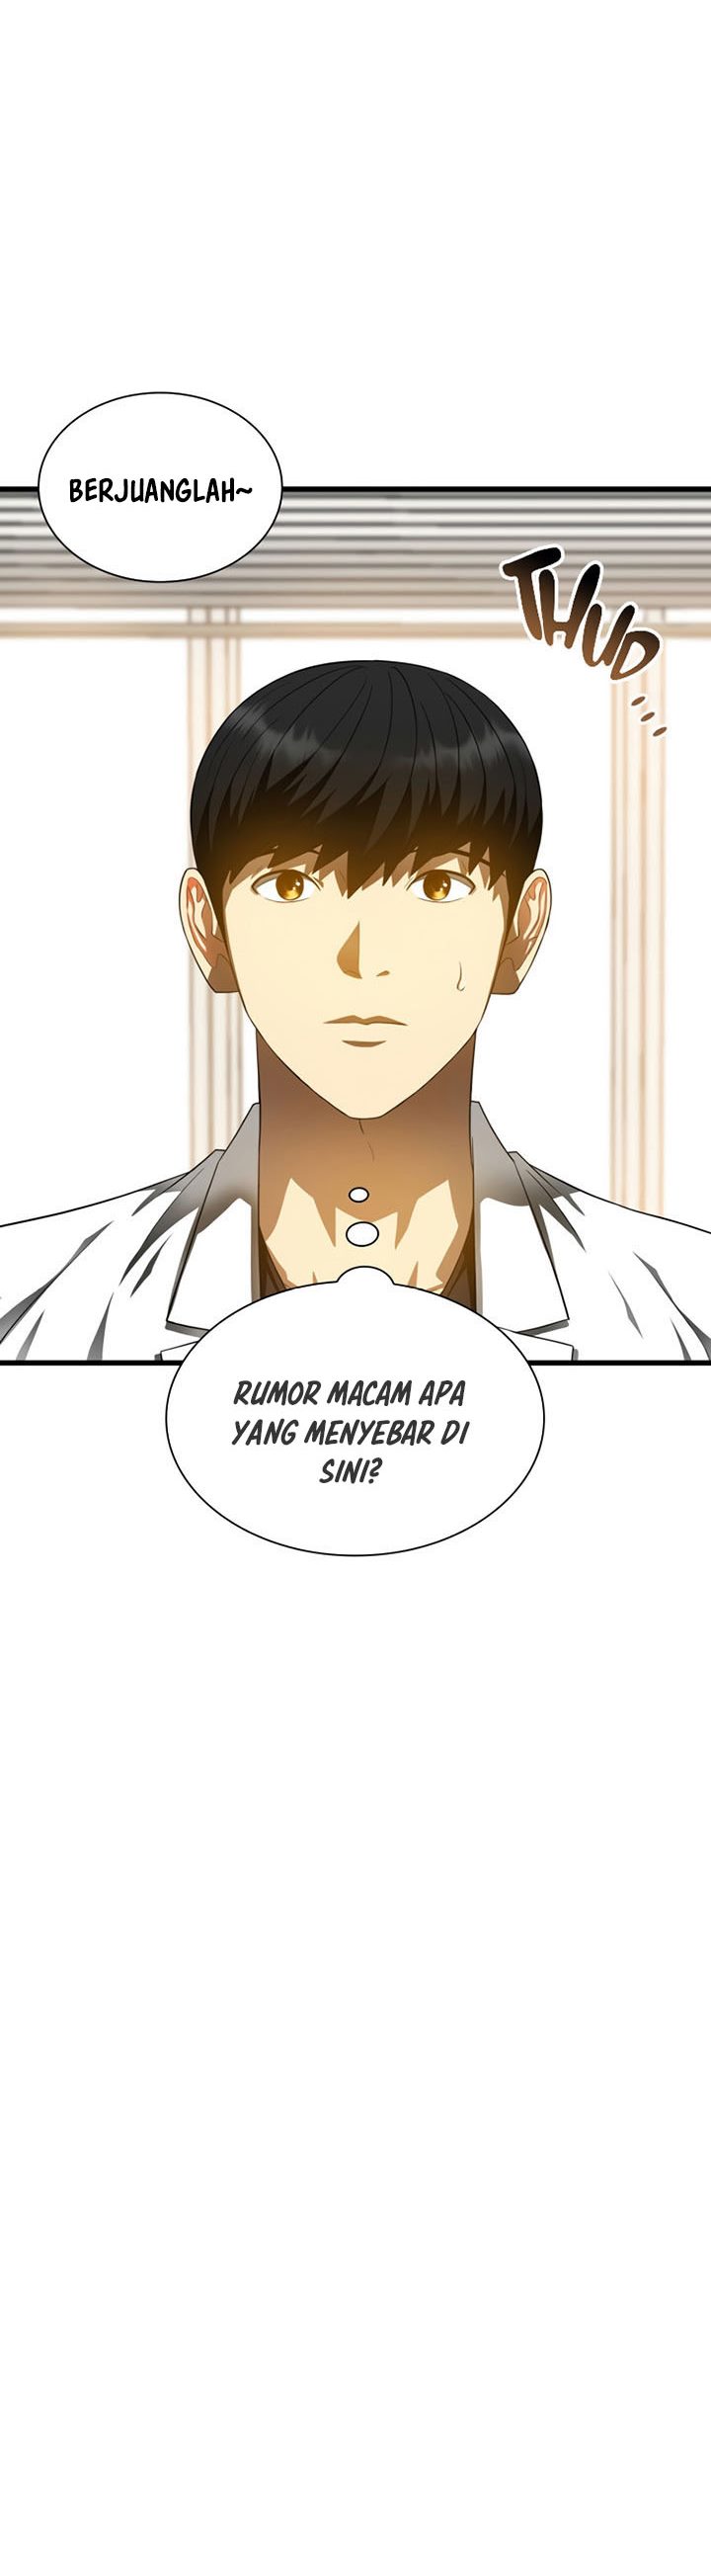 Perfect Surgeon Chapter 66